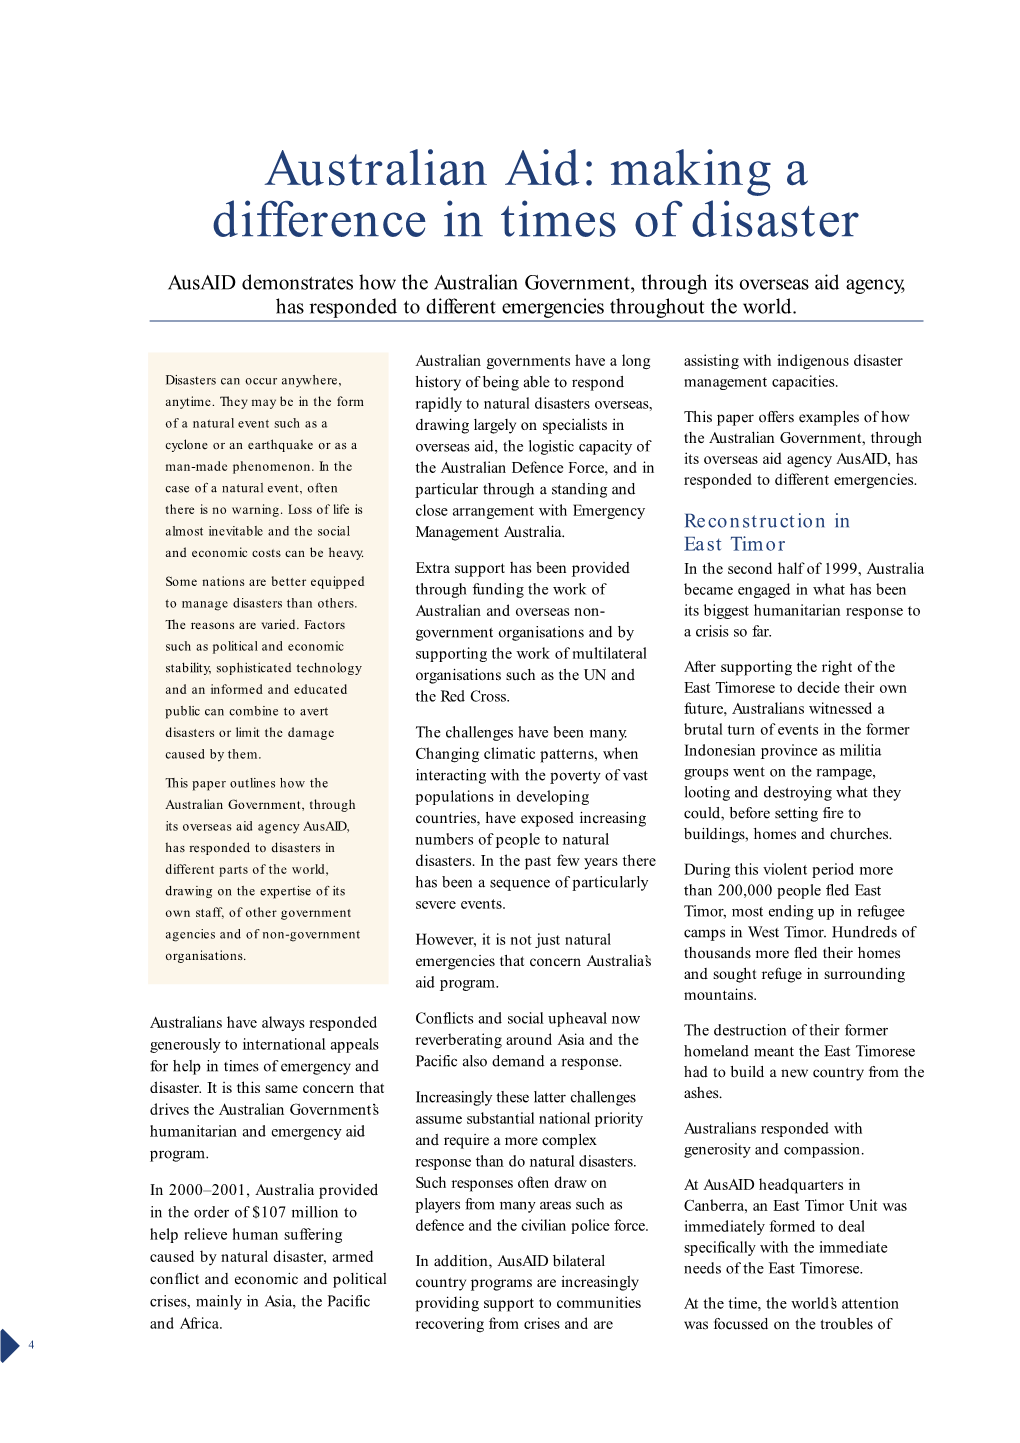 Australian Aid: Making a Difference in Times of Disaster